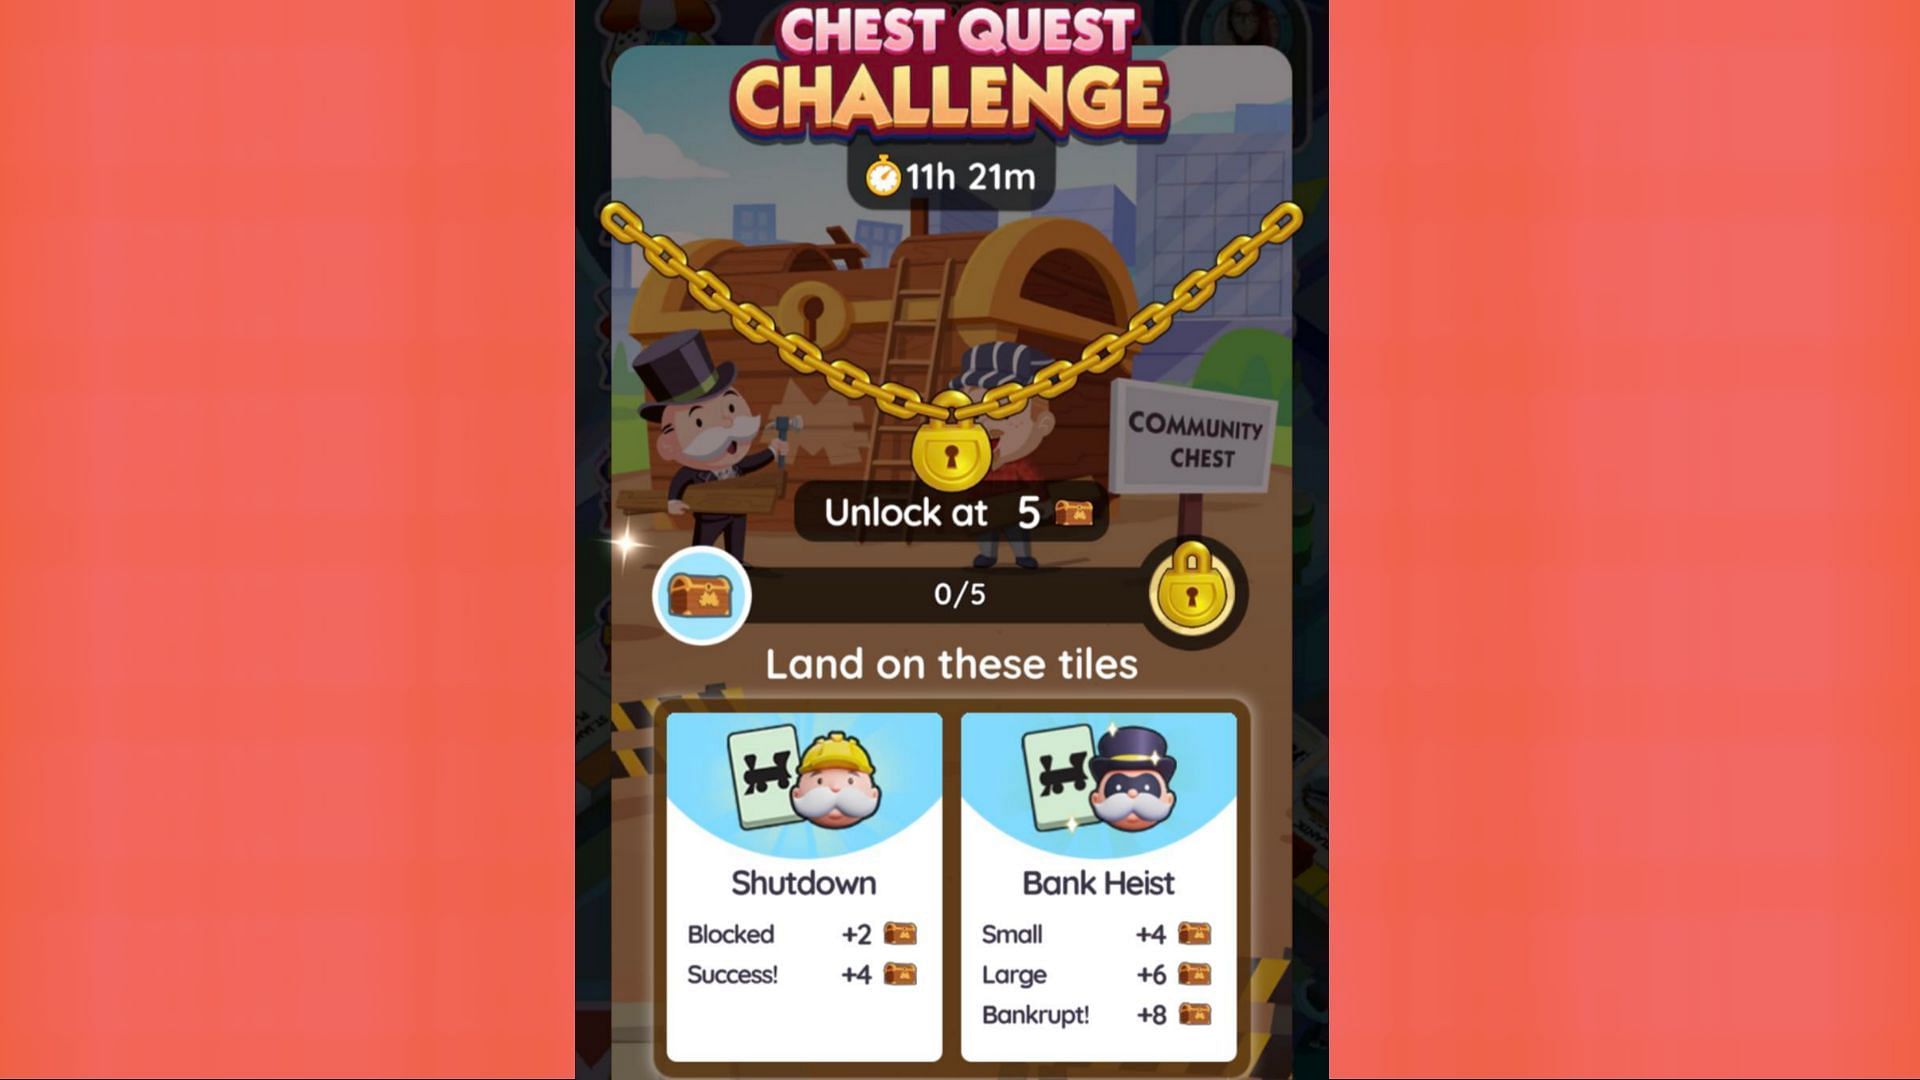 Chest Quest Challenge scoring system (Image via Scopely)